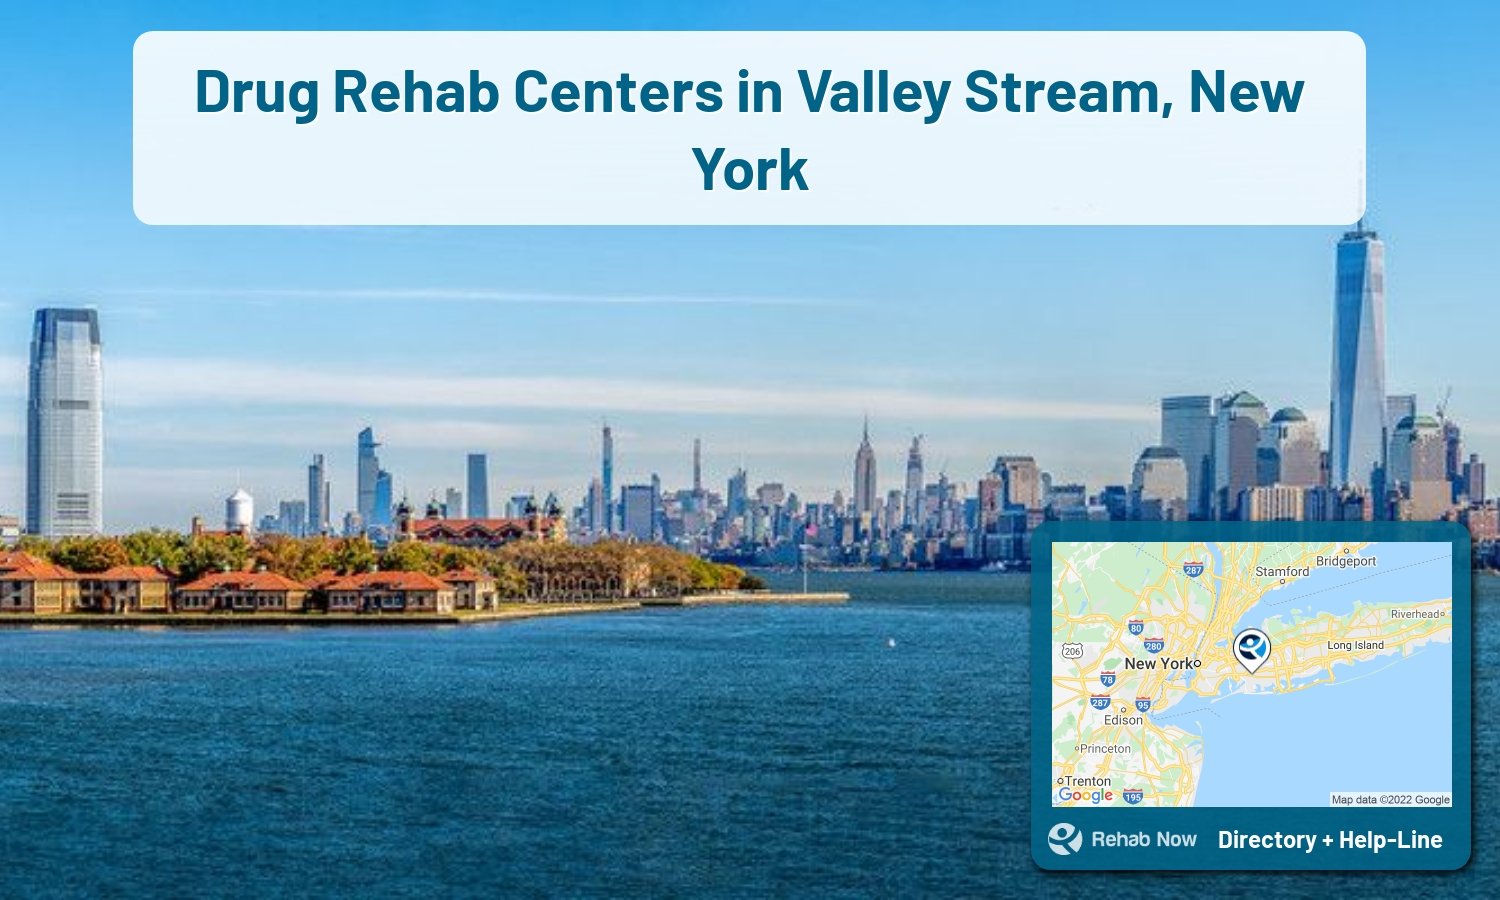 Find drug rehab and alcohol treatment services in Valley Stream. Our experts help you find a center in Valley Stream, New York